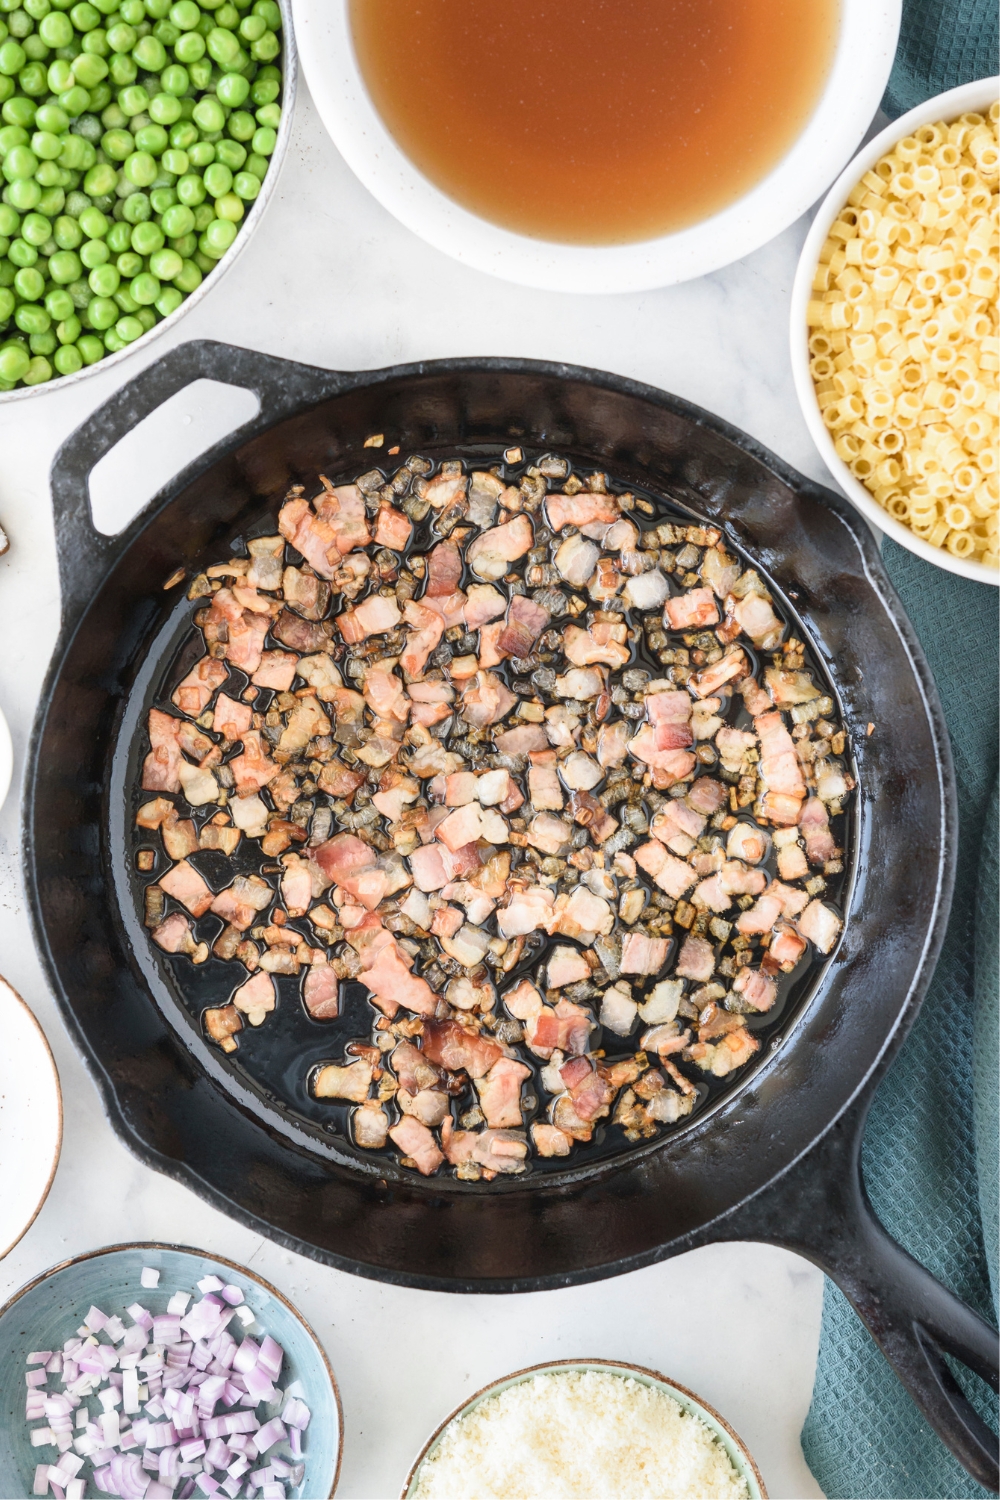 Bacon and peas sautéing in a black skillet